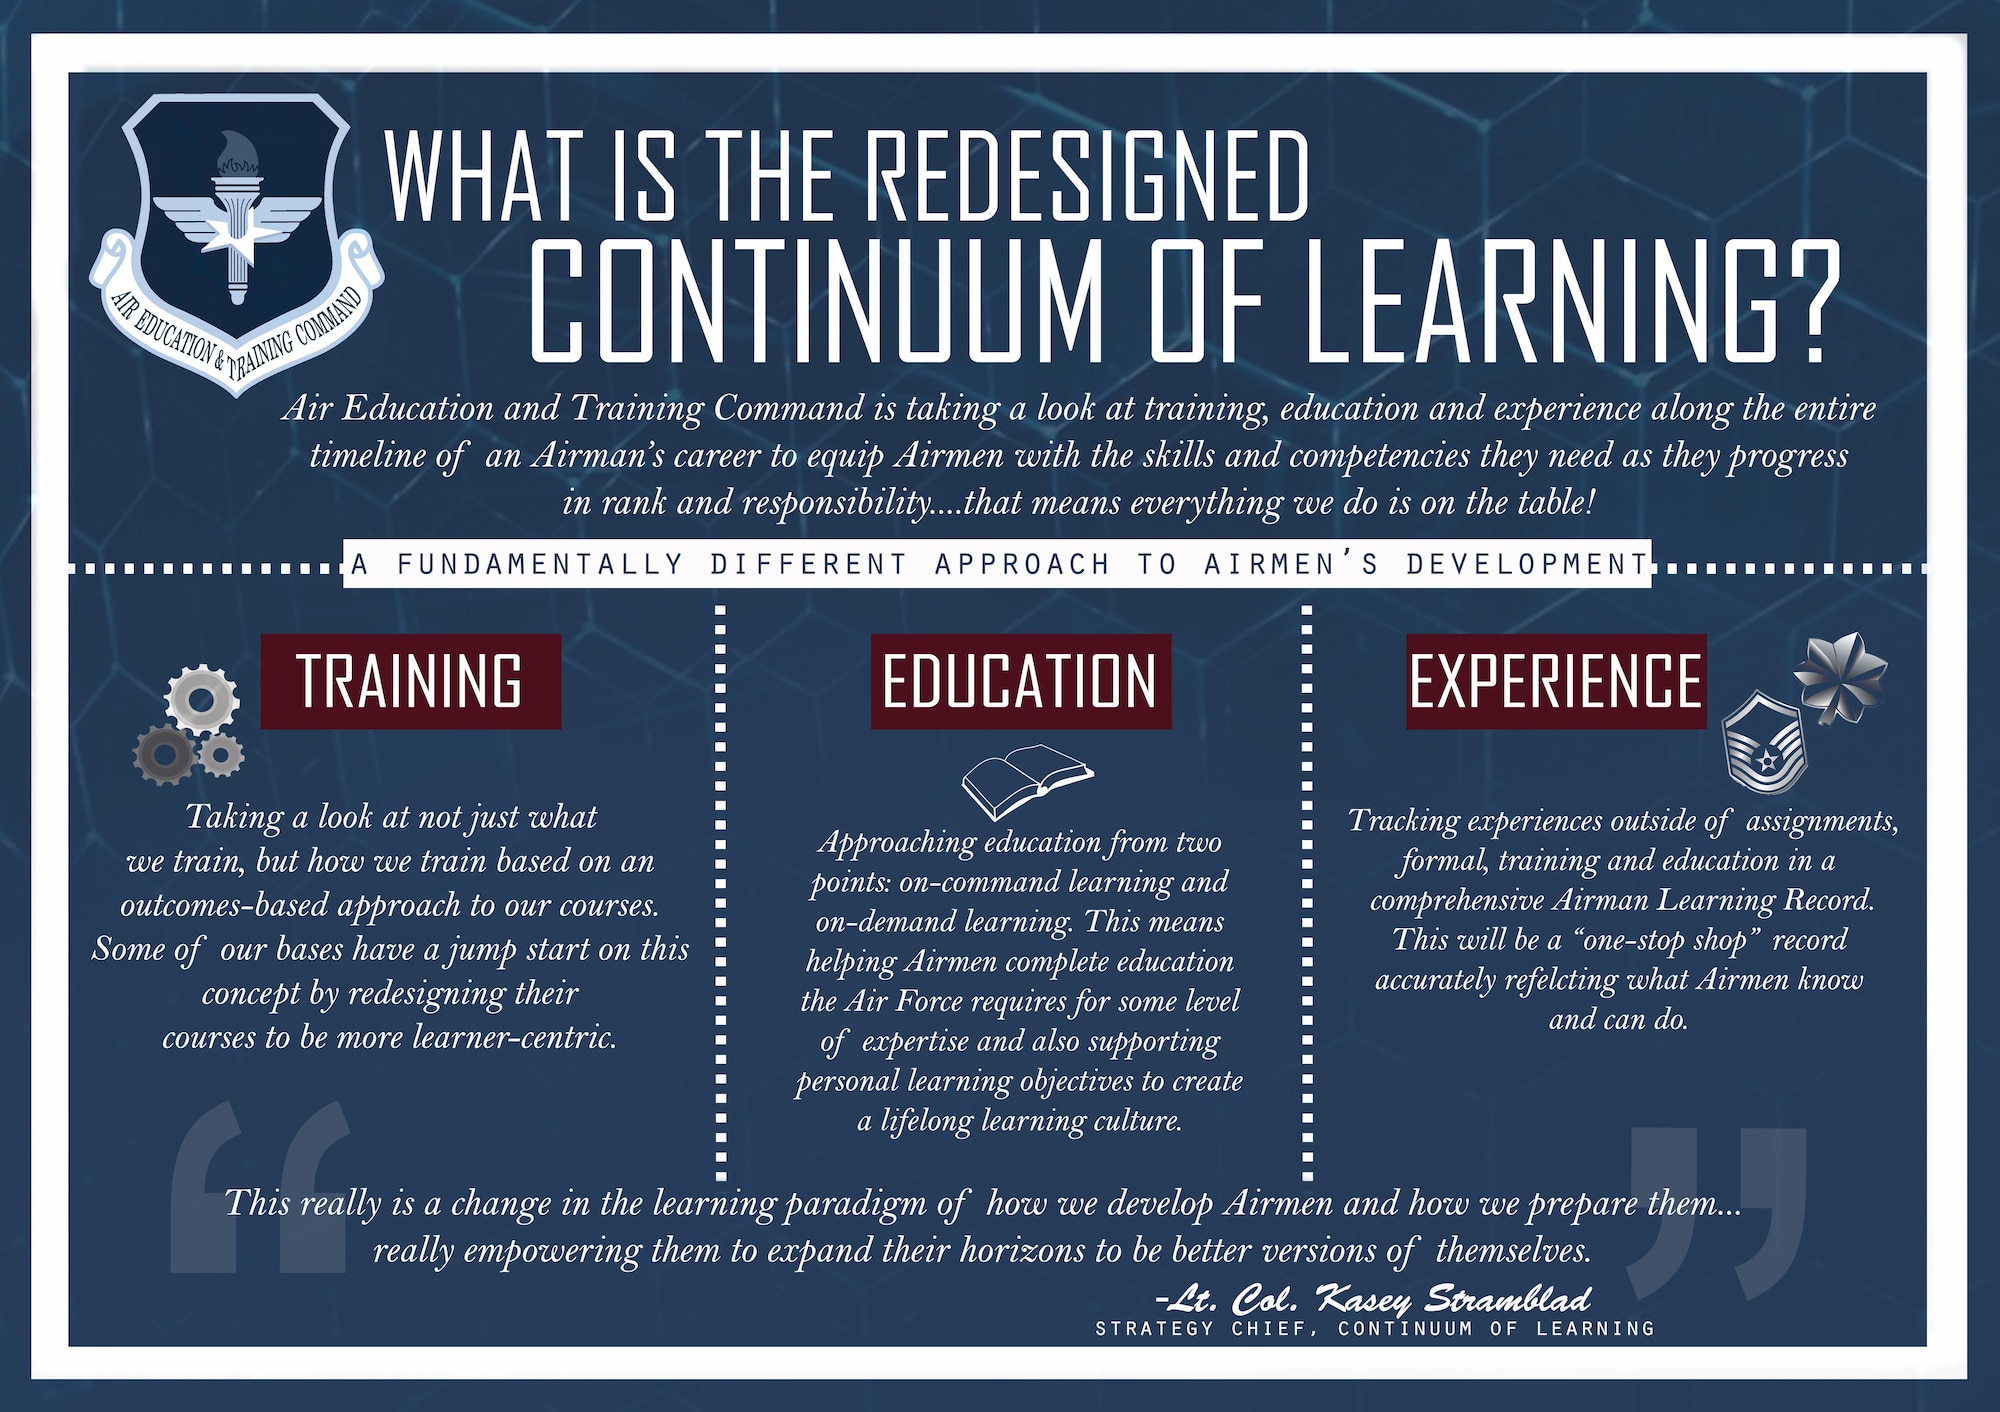 Education, Training, Experience: The Continuum of Learning